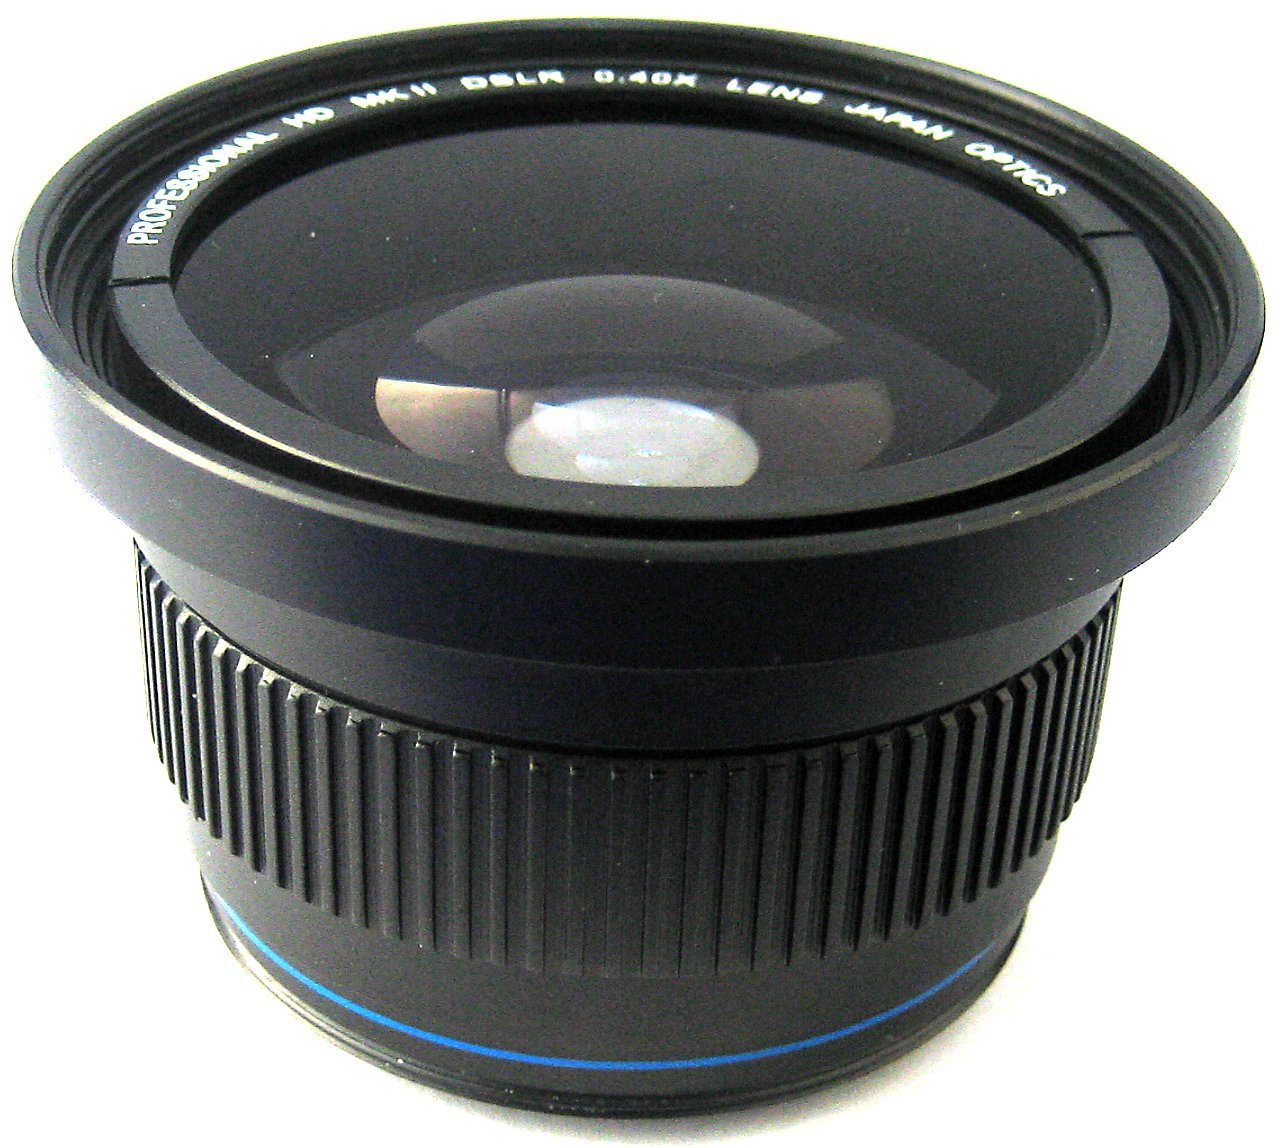 Zeikos ZE-3446F 46/49/52/58mm 0.40x high definition Fisheye lens with Macro attachment, includes lens pouch and cap covers